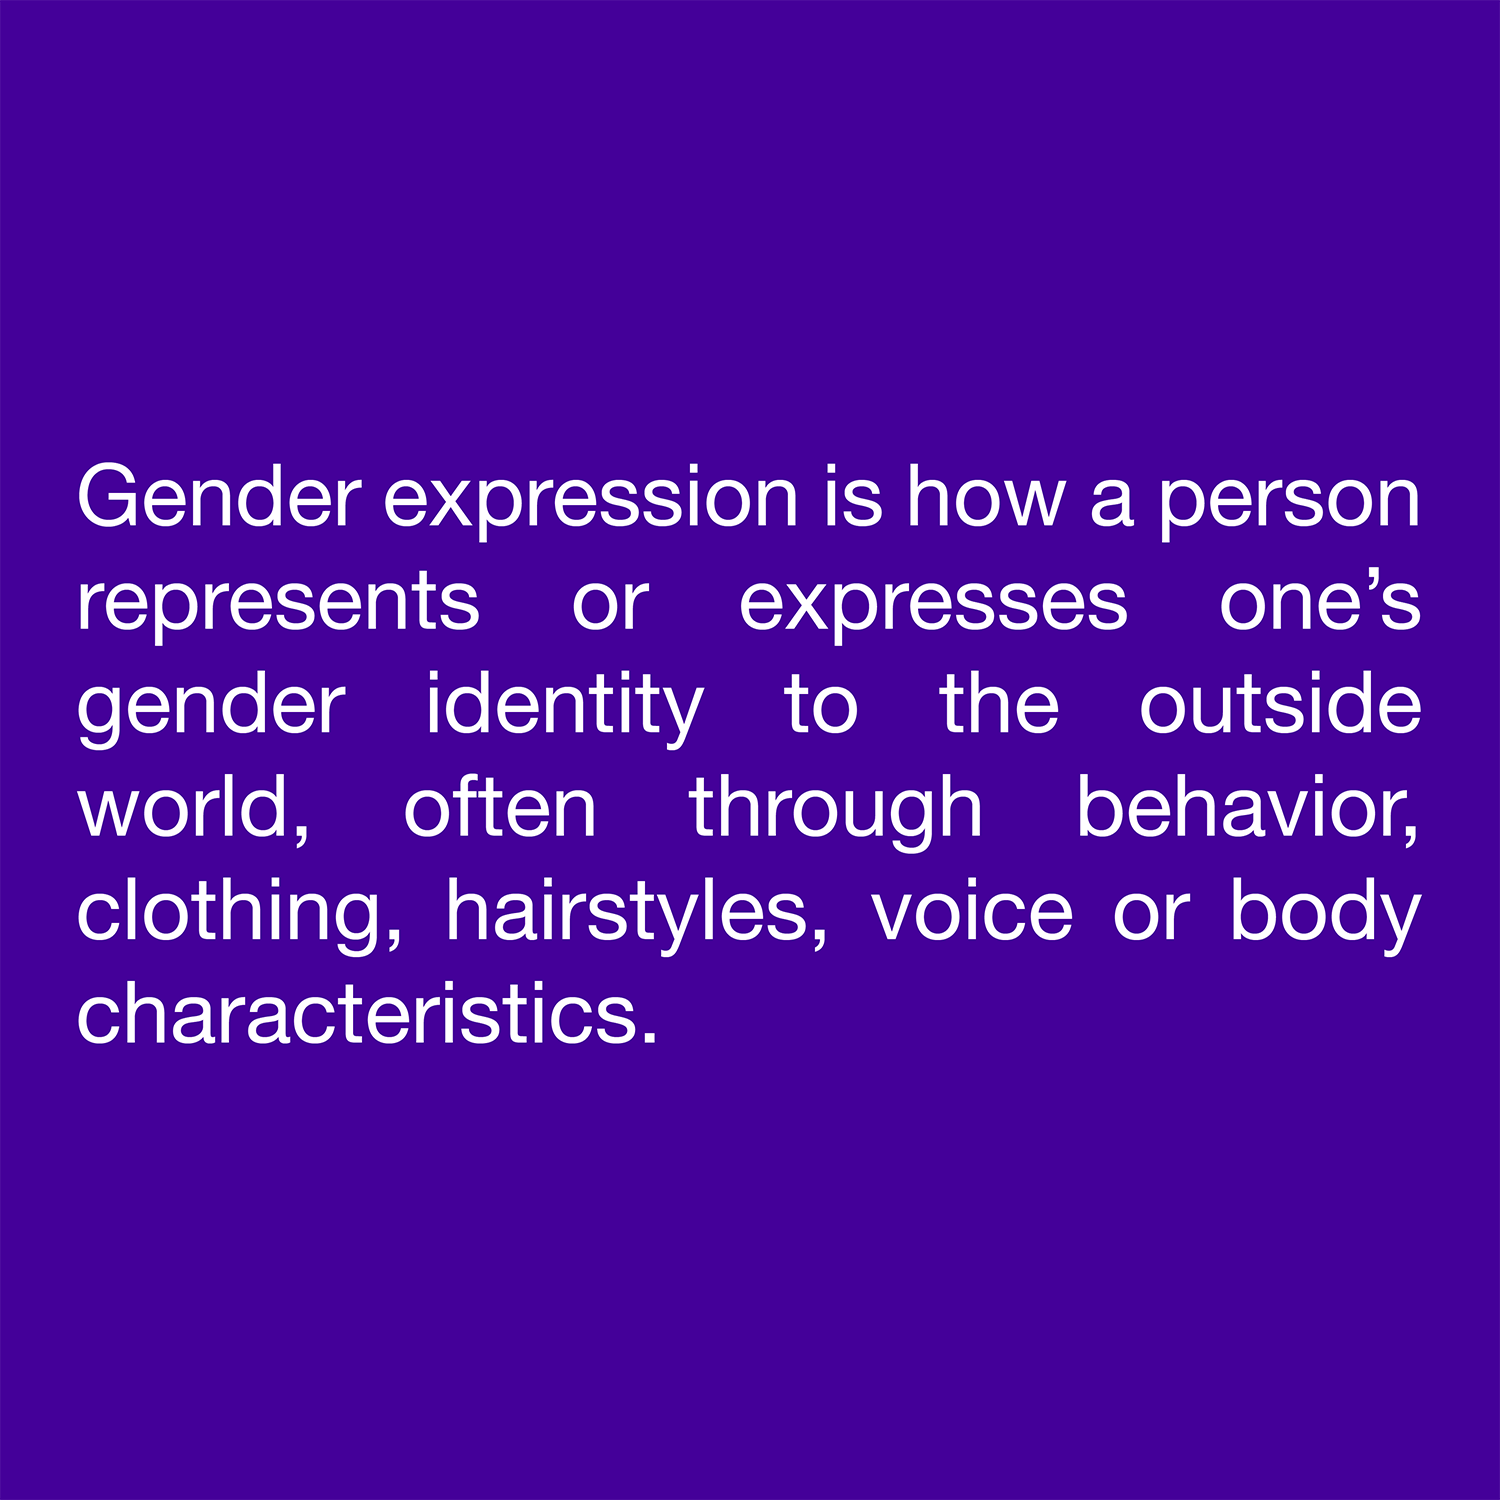  Gender expression is how a person represents or expresses one’s gender identity to the outside world, often through behavior, clothing, hairstyles, voice or body characteristics. 